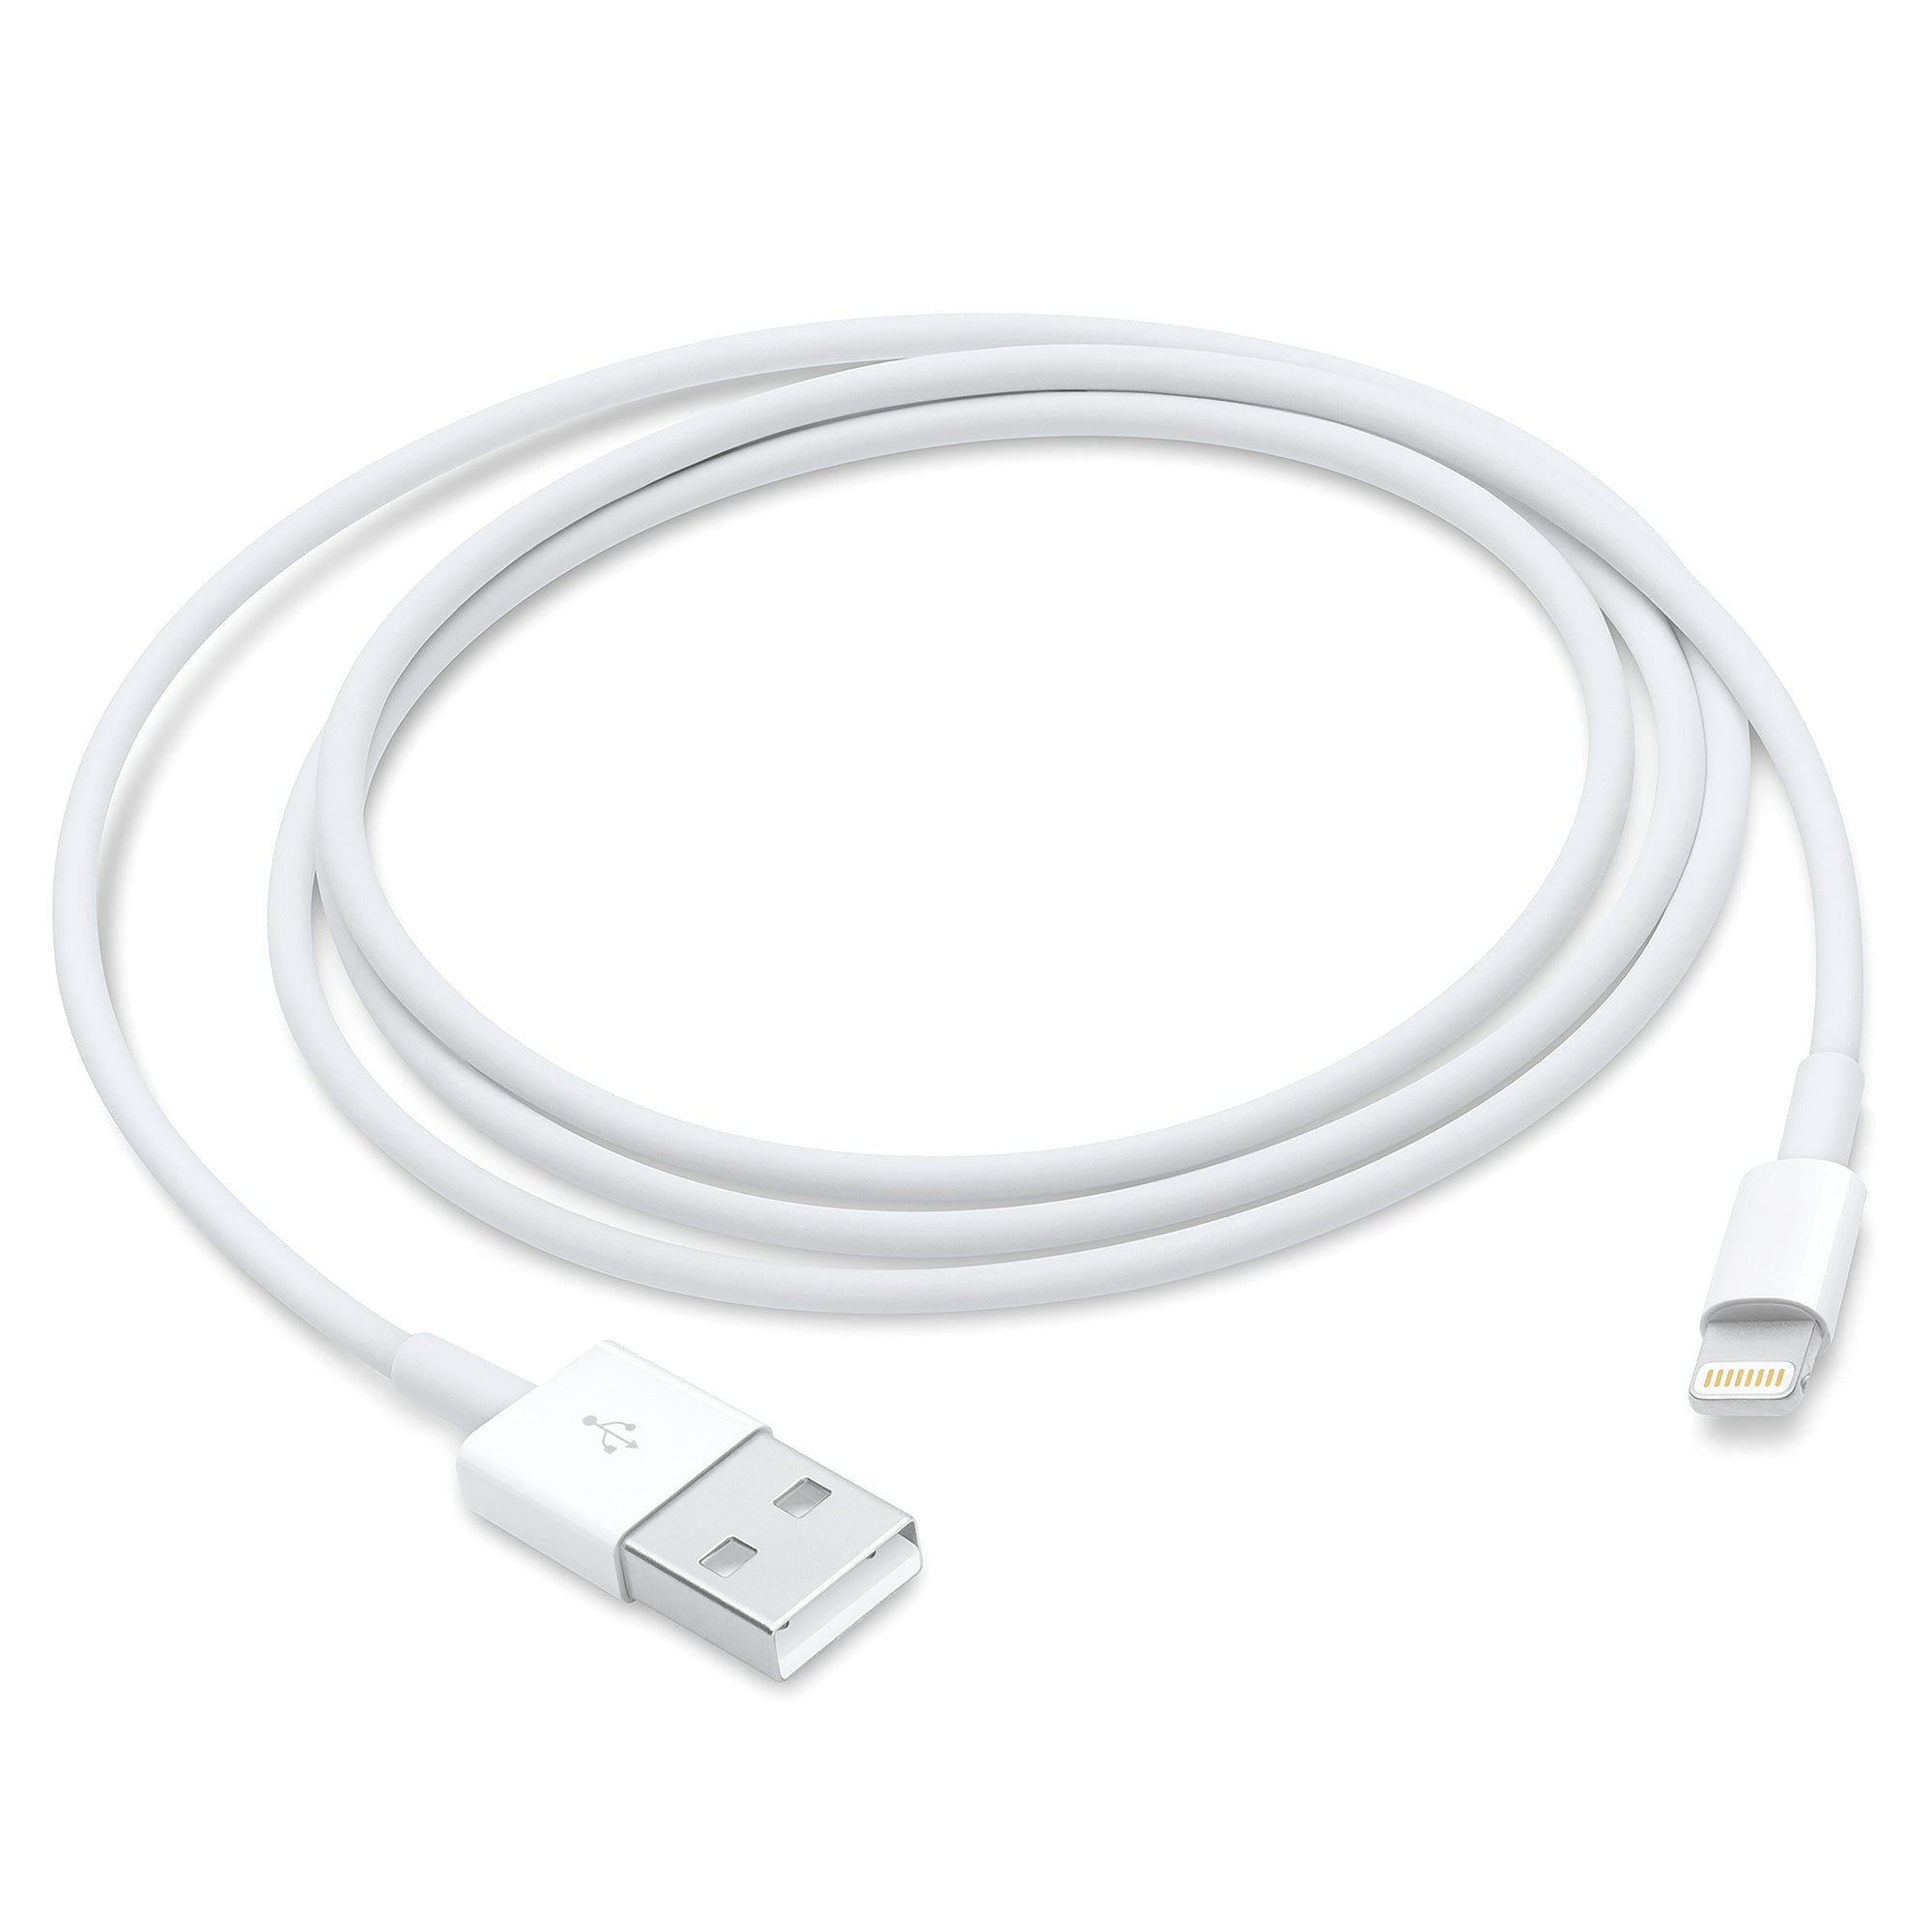 Apple Lightning to USB Cable – Three Accessories